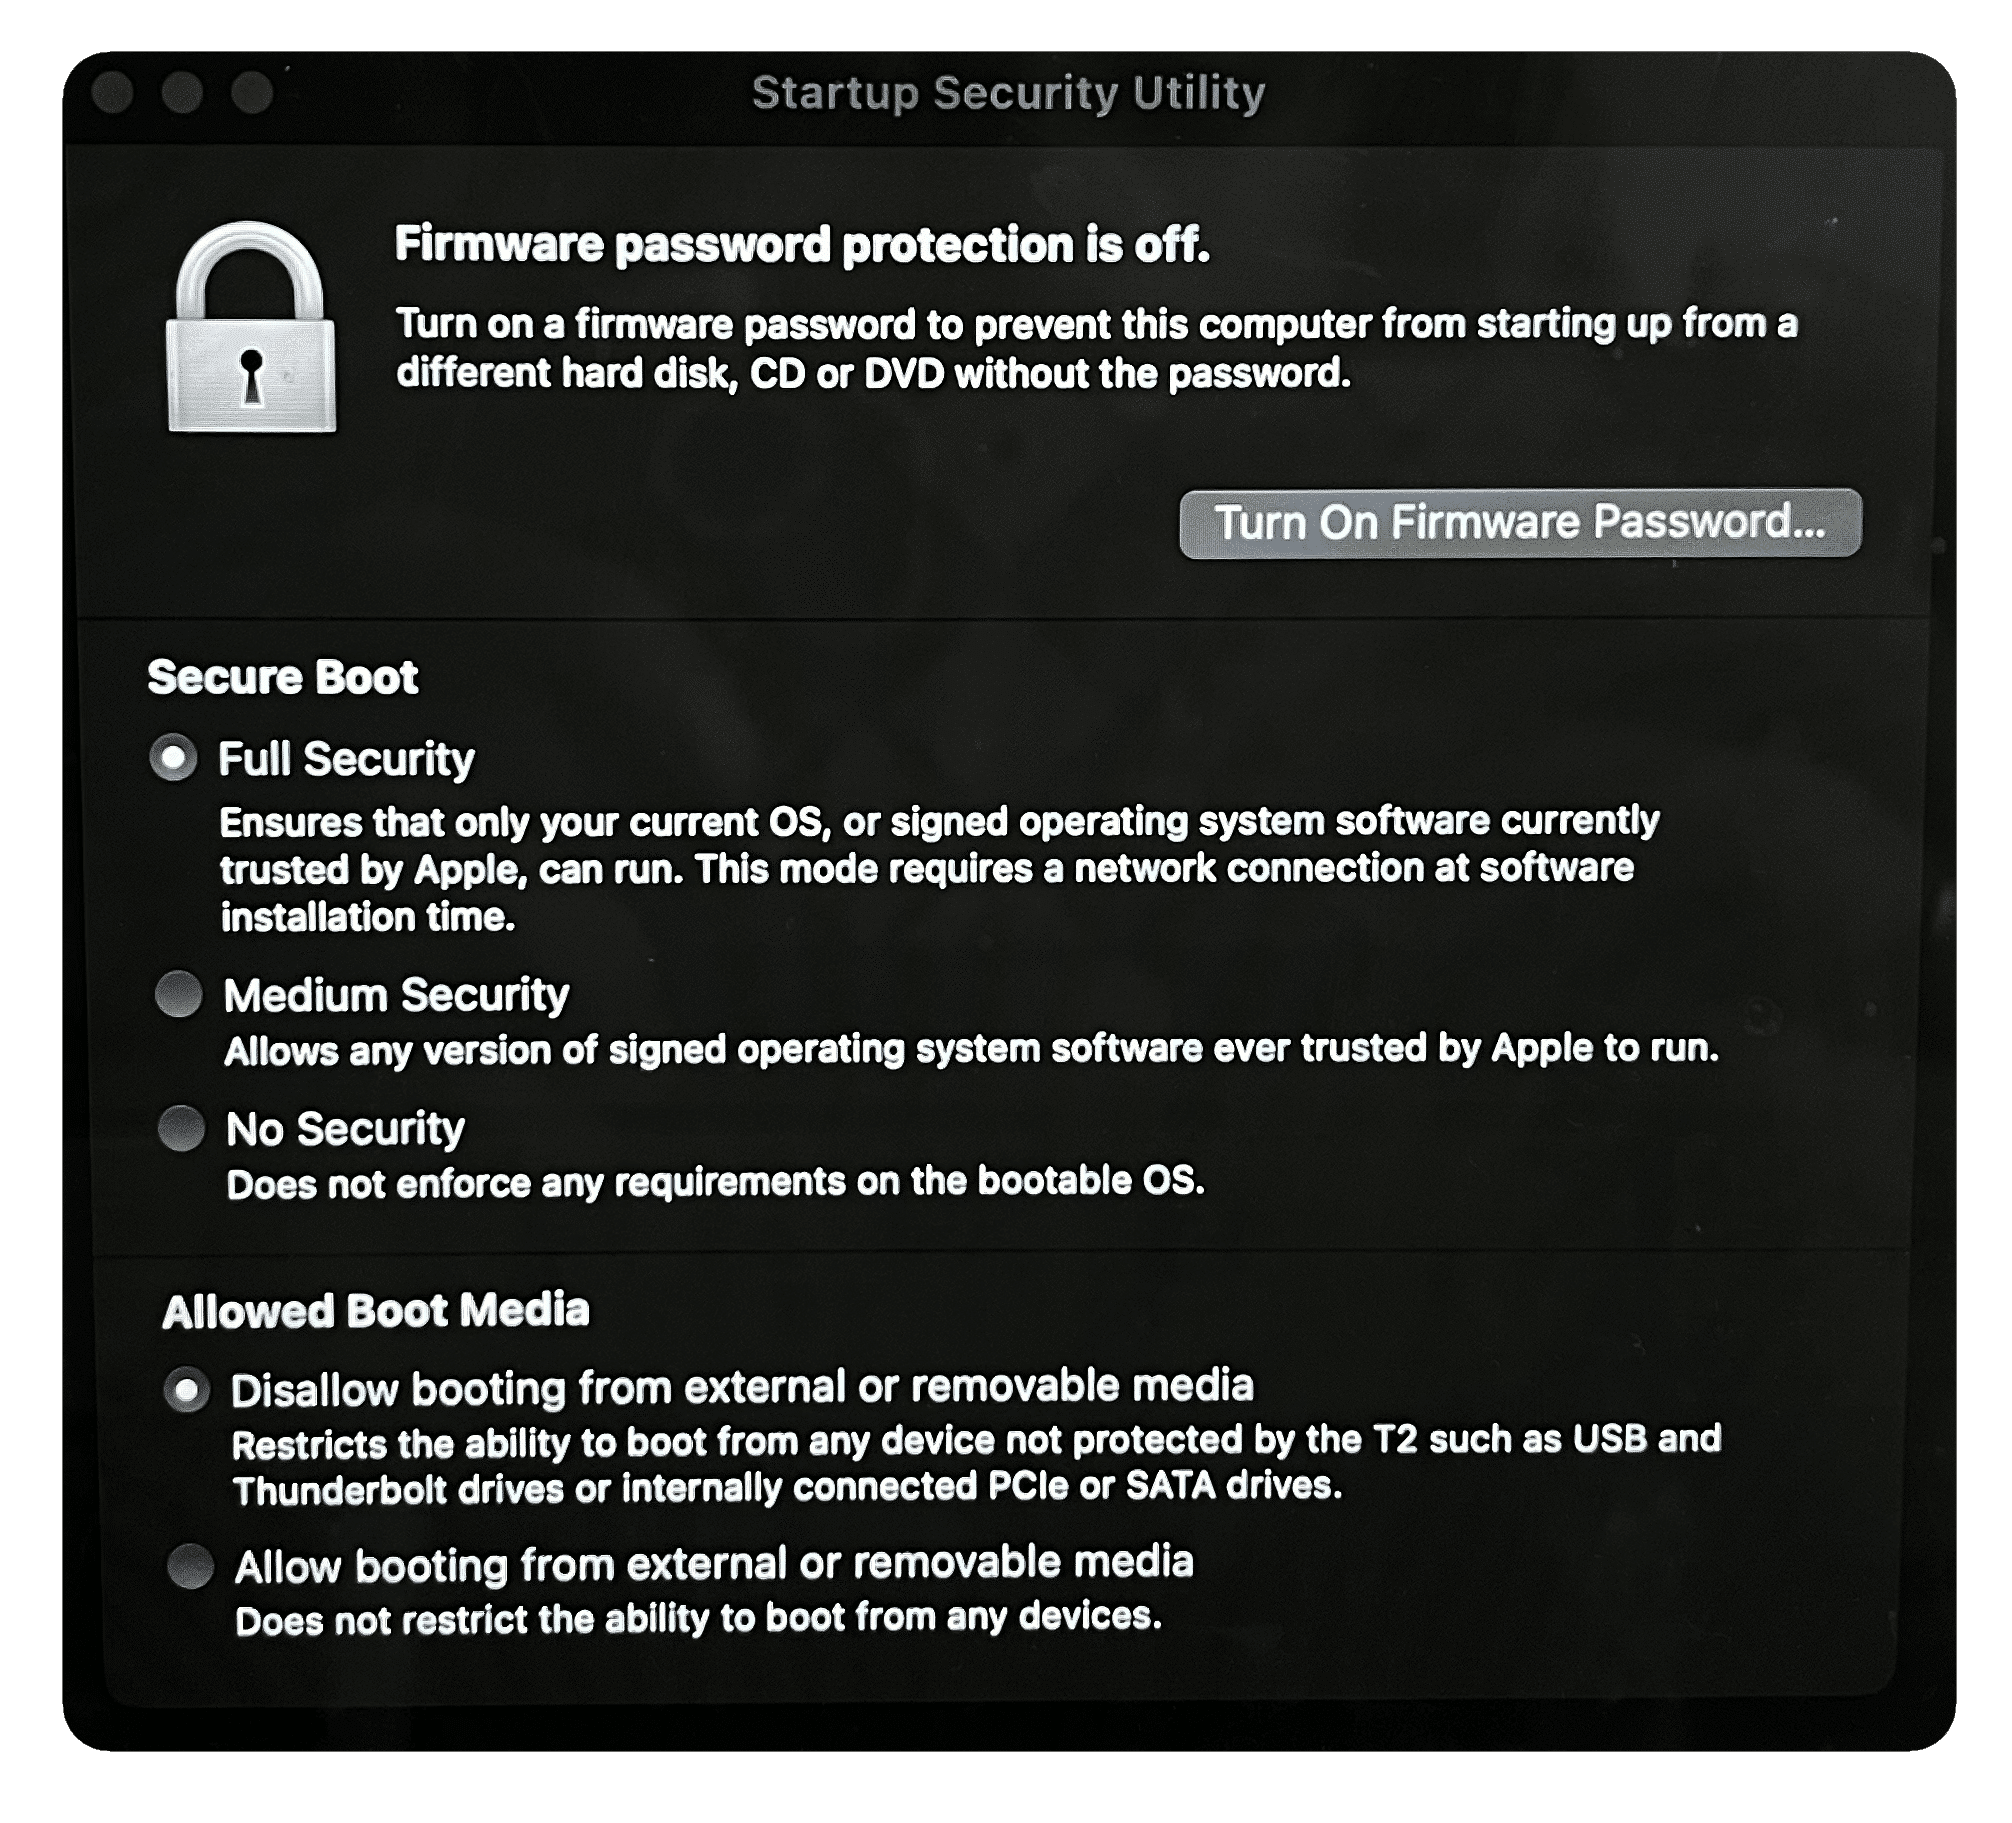 Startup Security Utility settings window